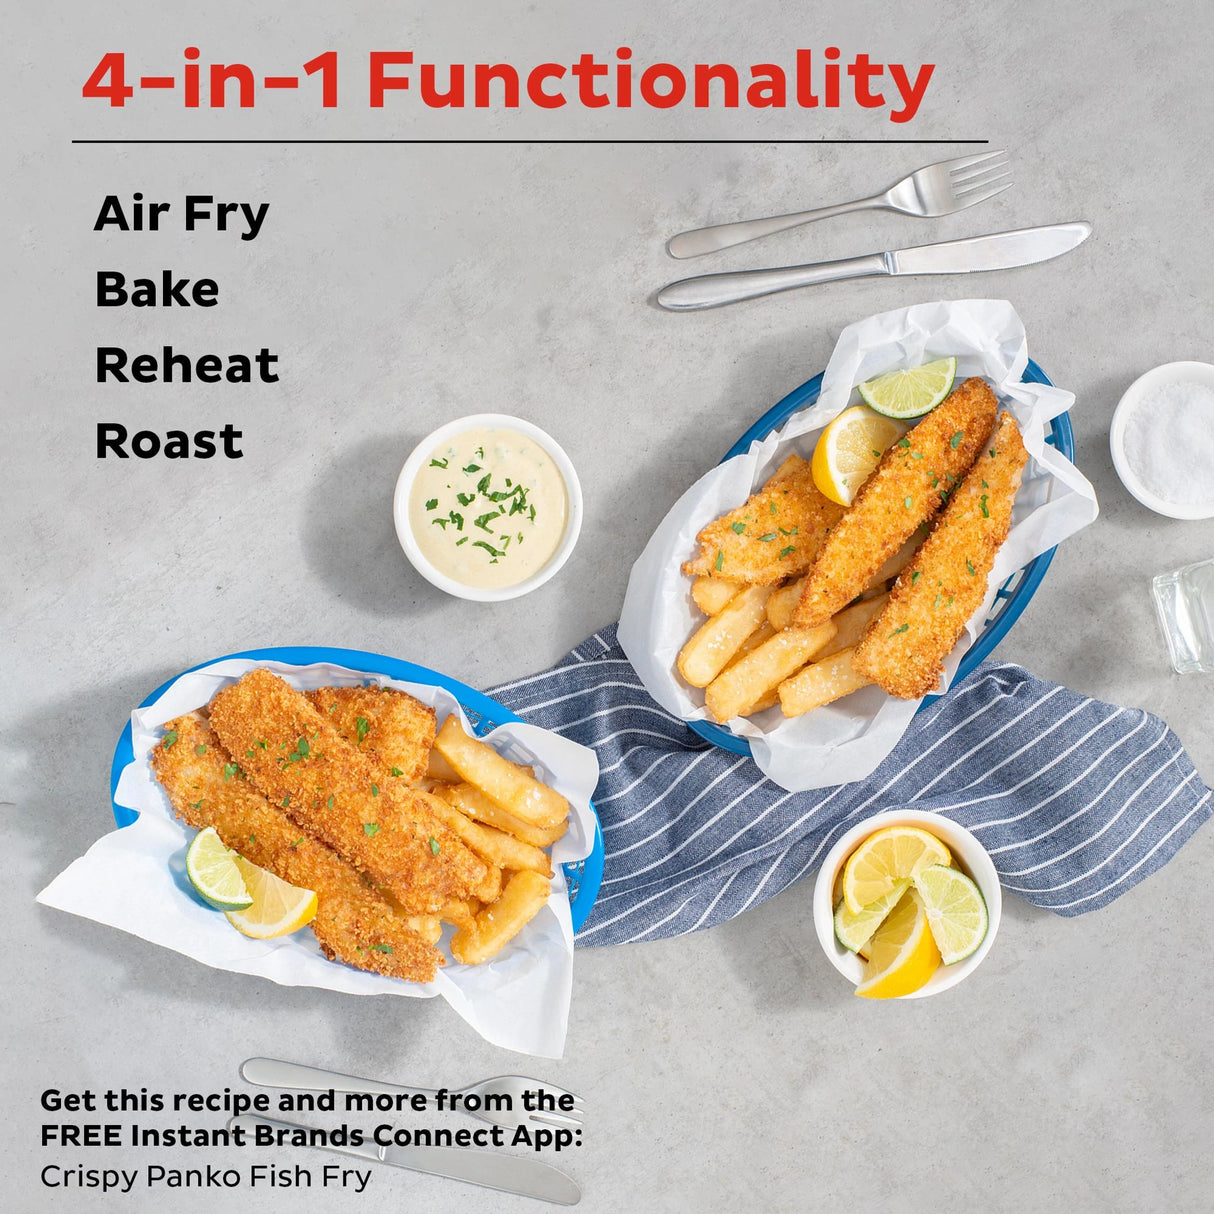  Instant™  Vortex™ 5.7-quart Air Fryer with text 4 in 1 Functionality